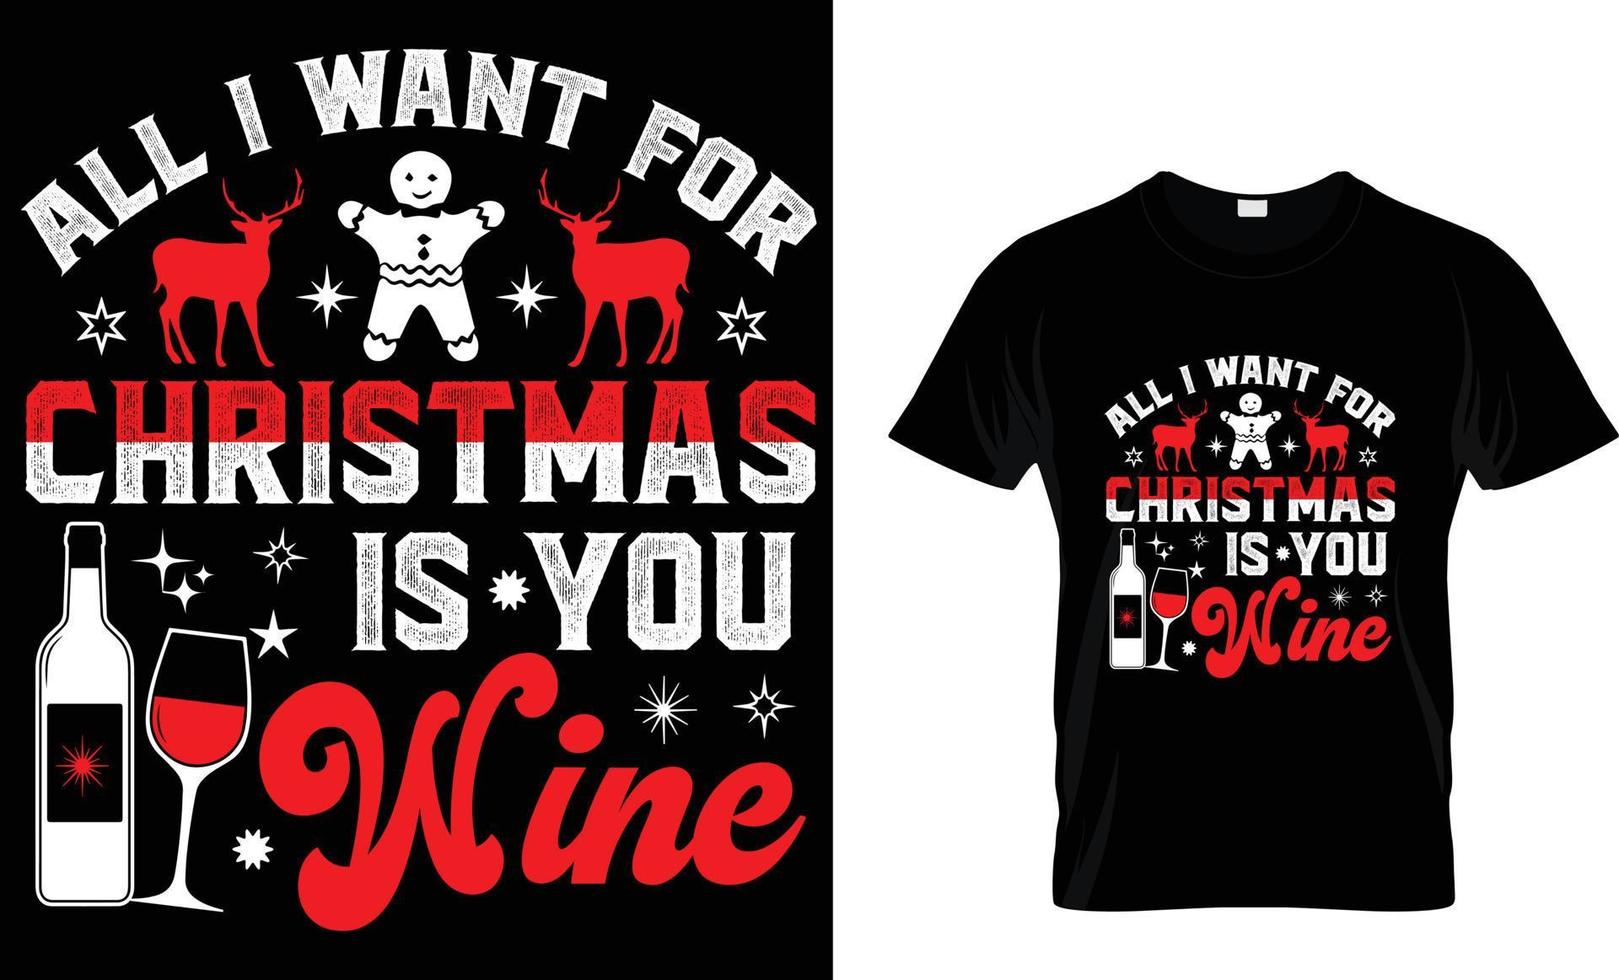 Christmas t-shirt design vector graphic. All I want for Christmas is you wine